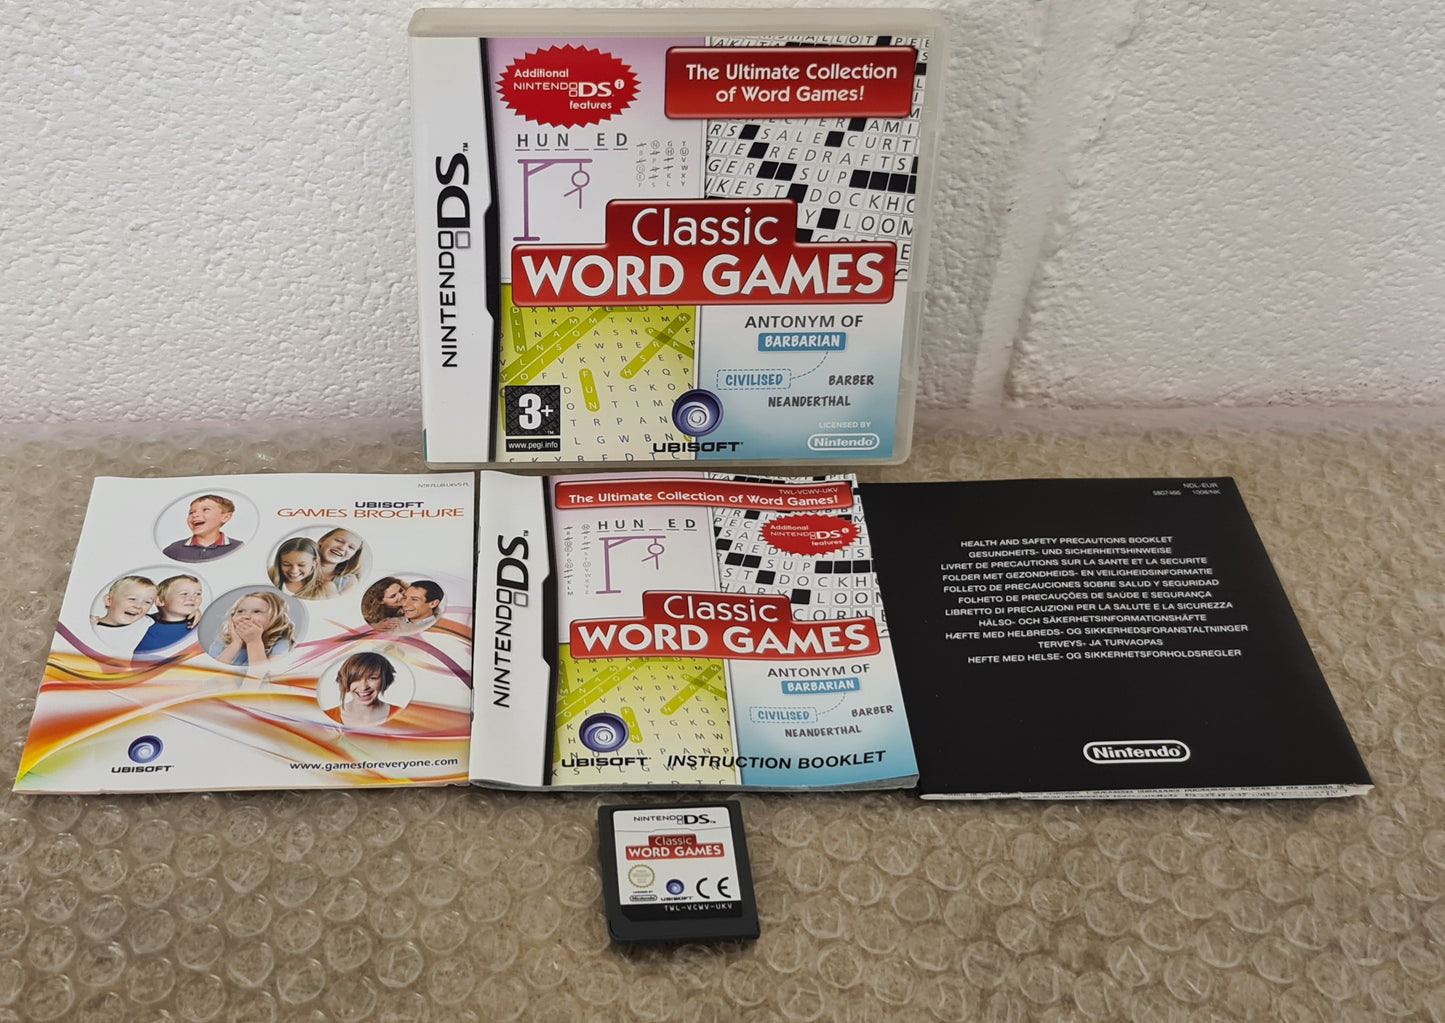 Classic Word Games Nintendo DS Game